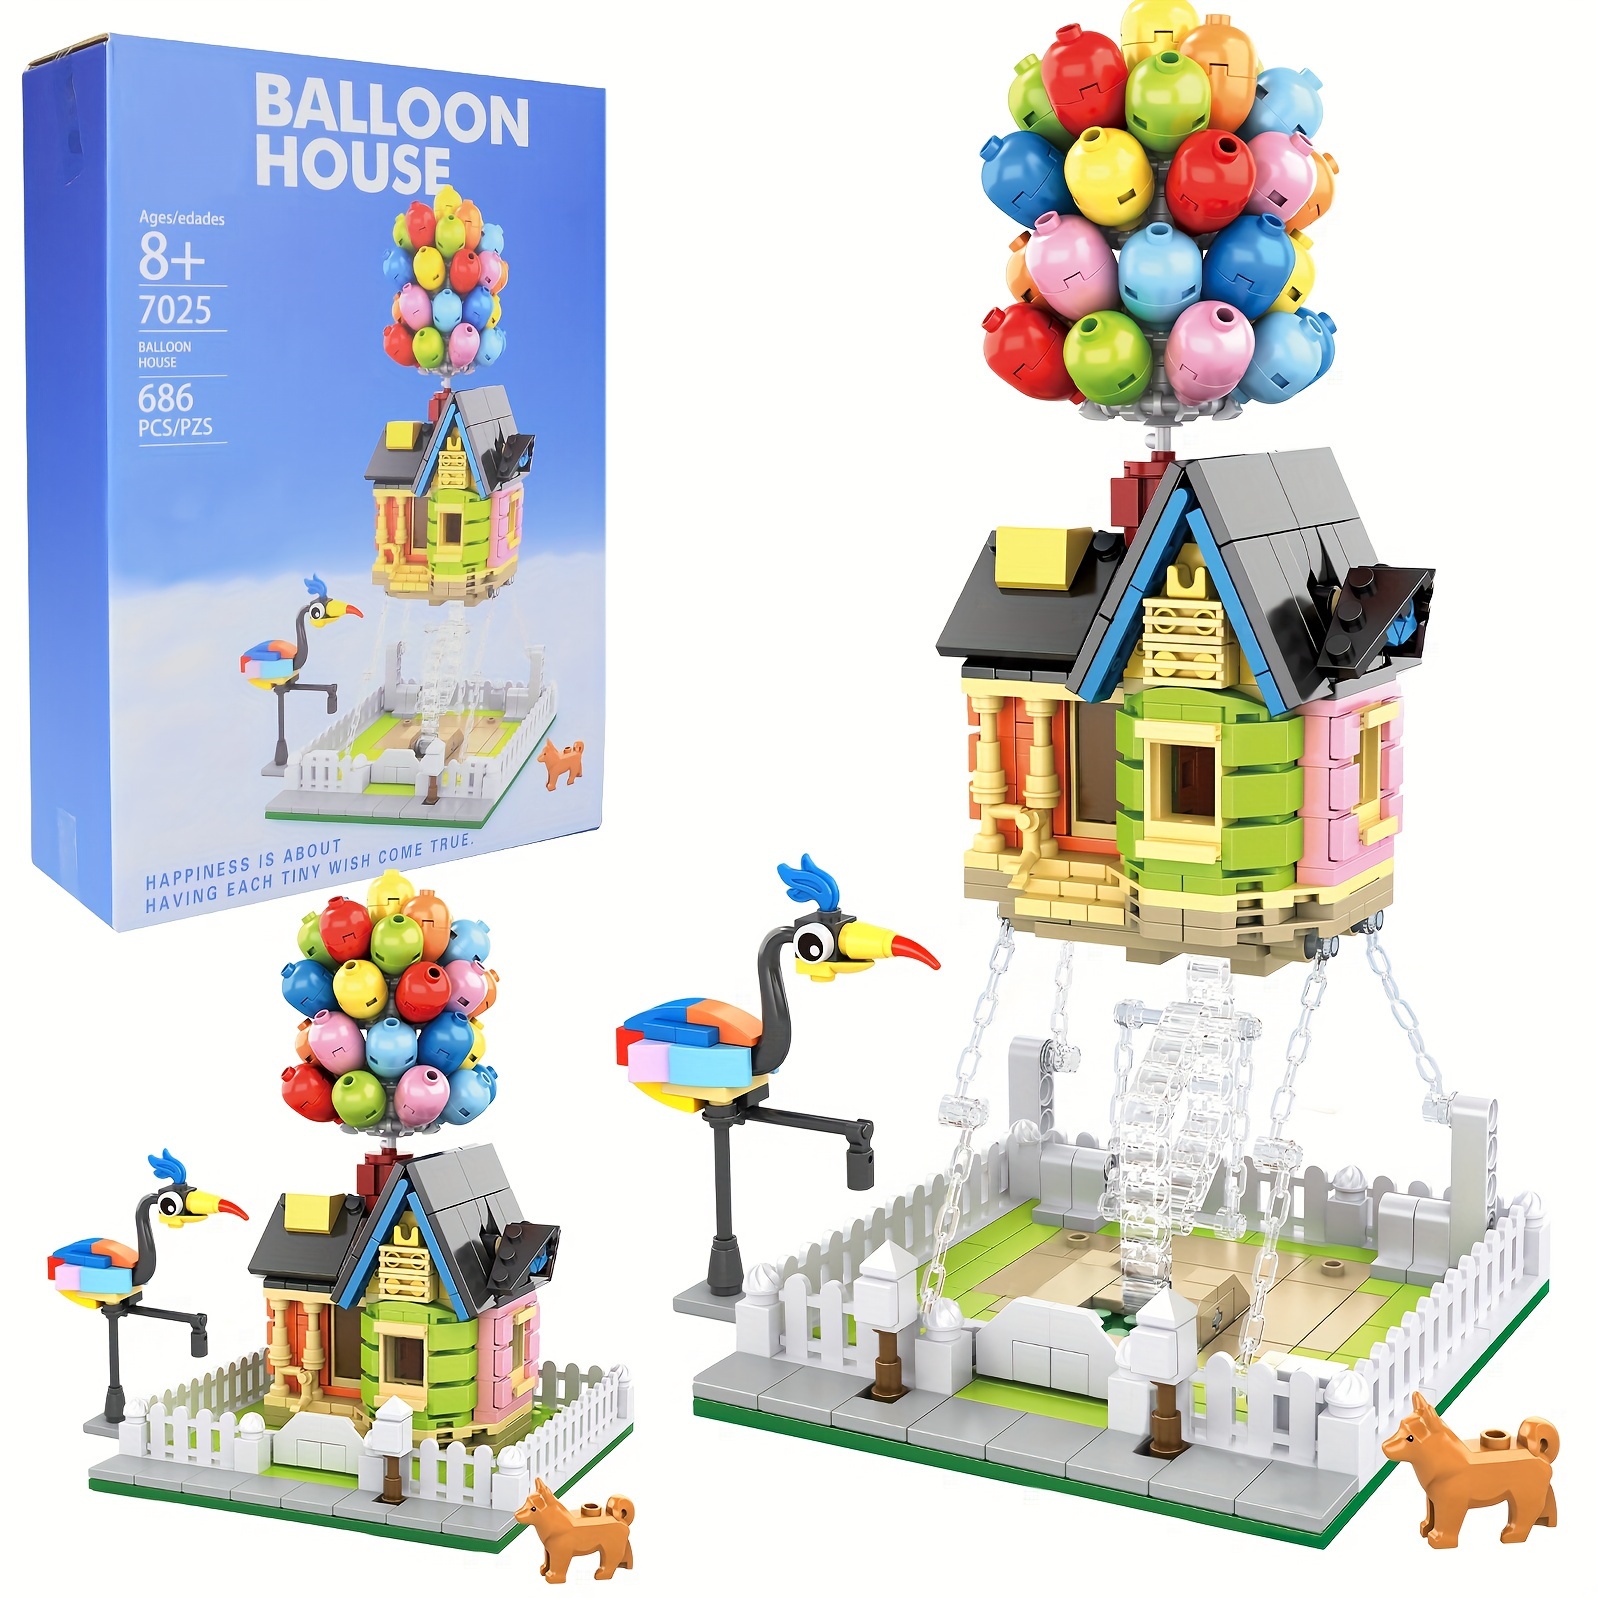 

686pcs Up Balloon House Building Kit, Flying House Building Block Model Set, Creative Suspended Anti-gravity Toy Balloon House Building Kit Halloween Christmas Gifts